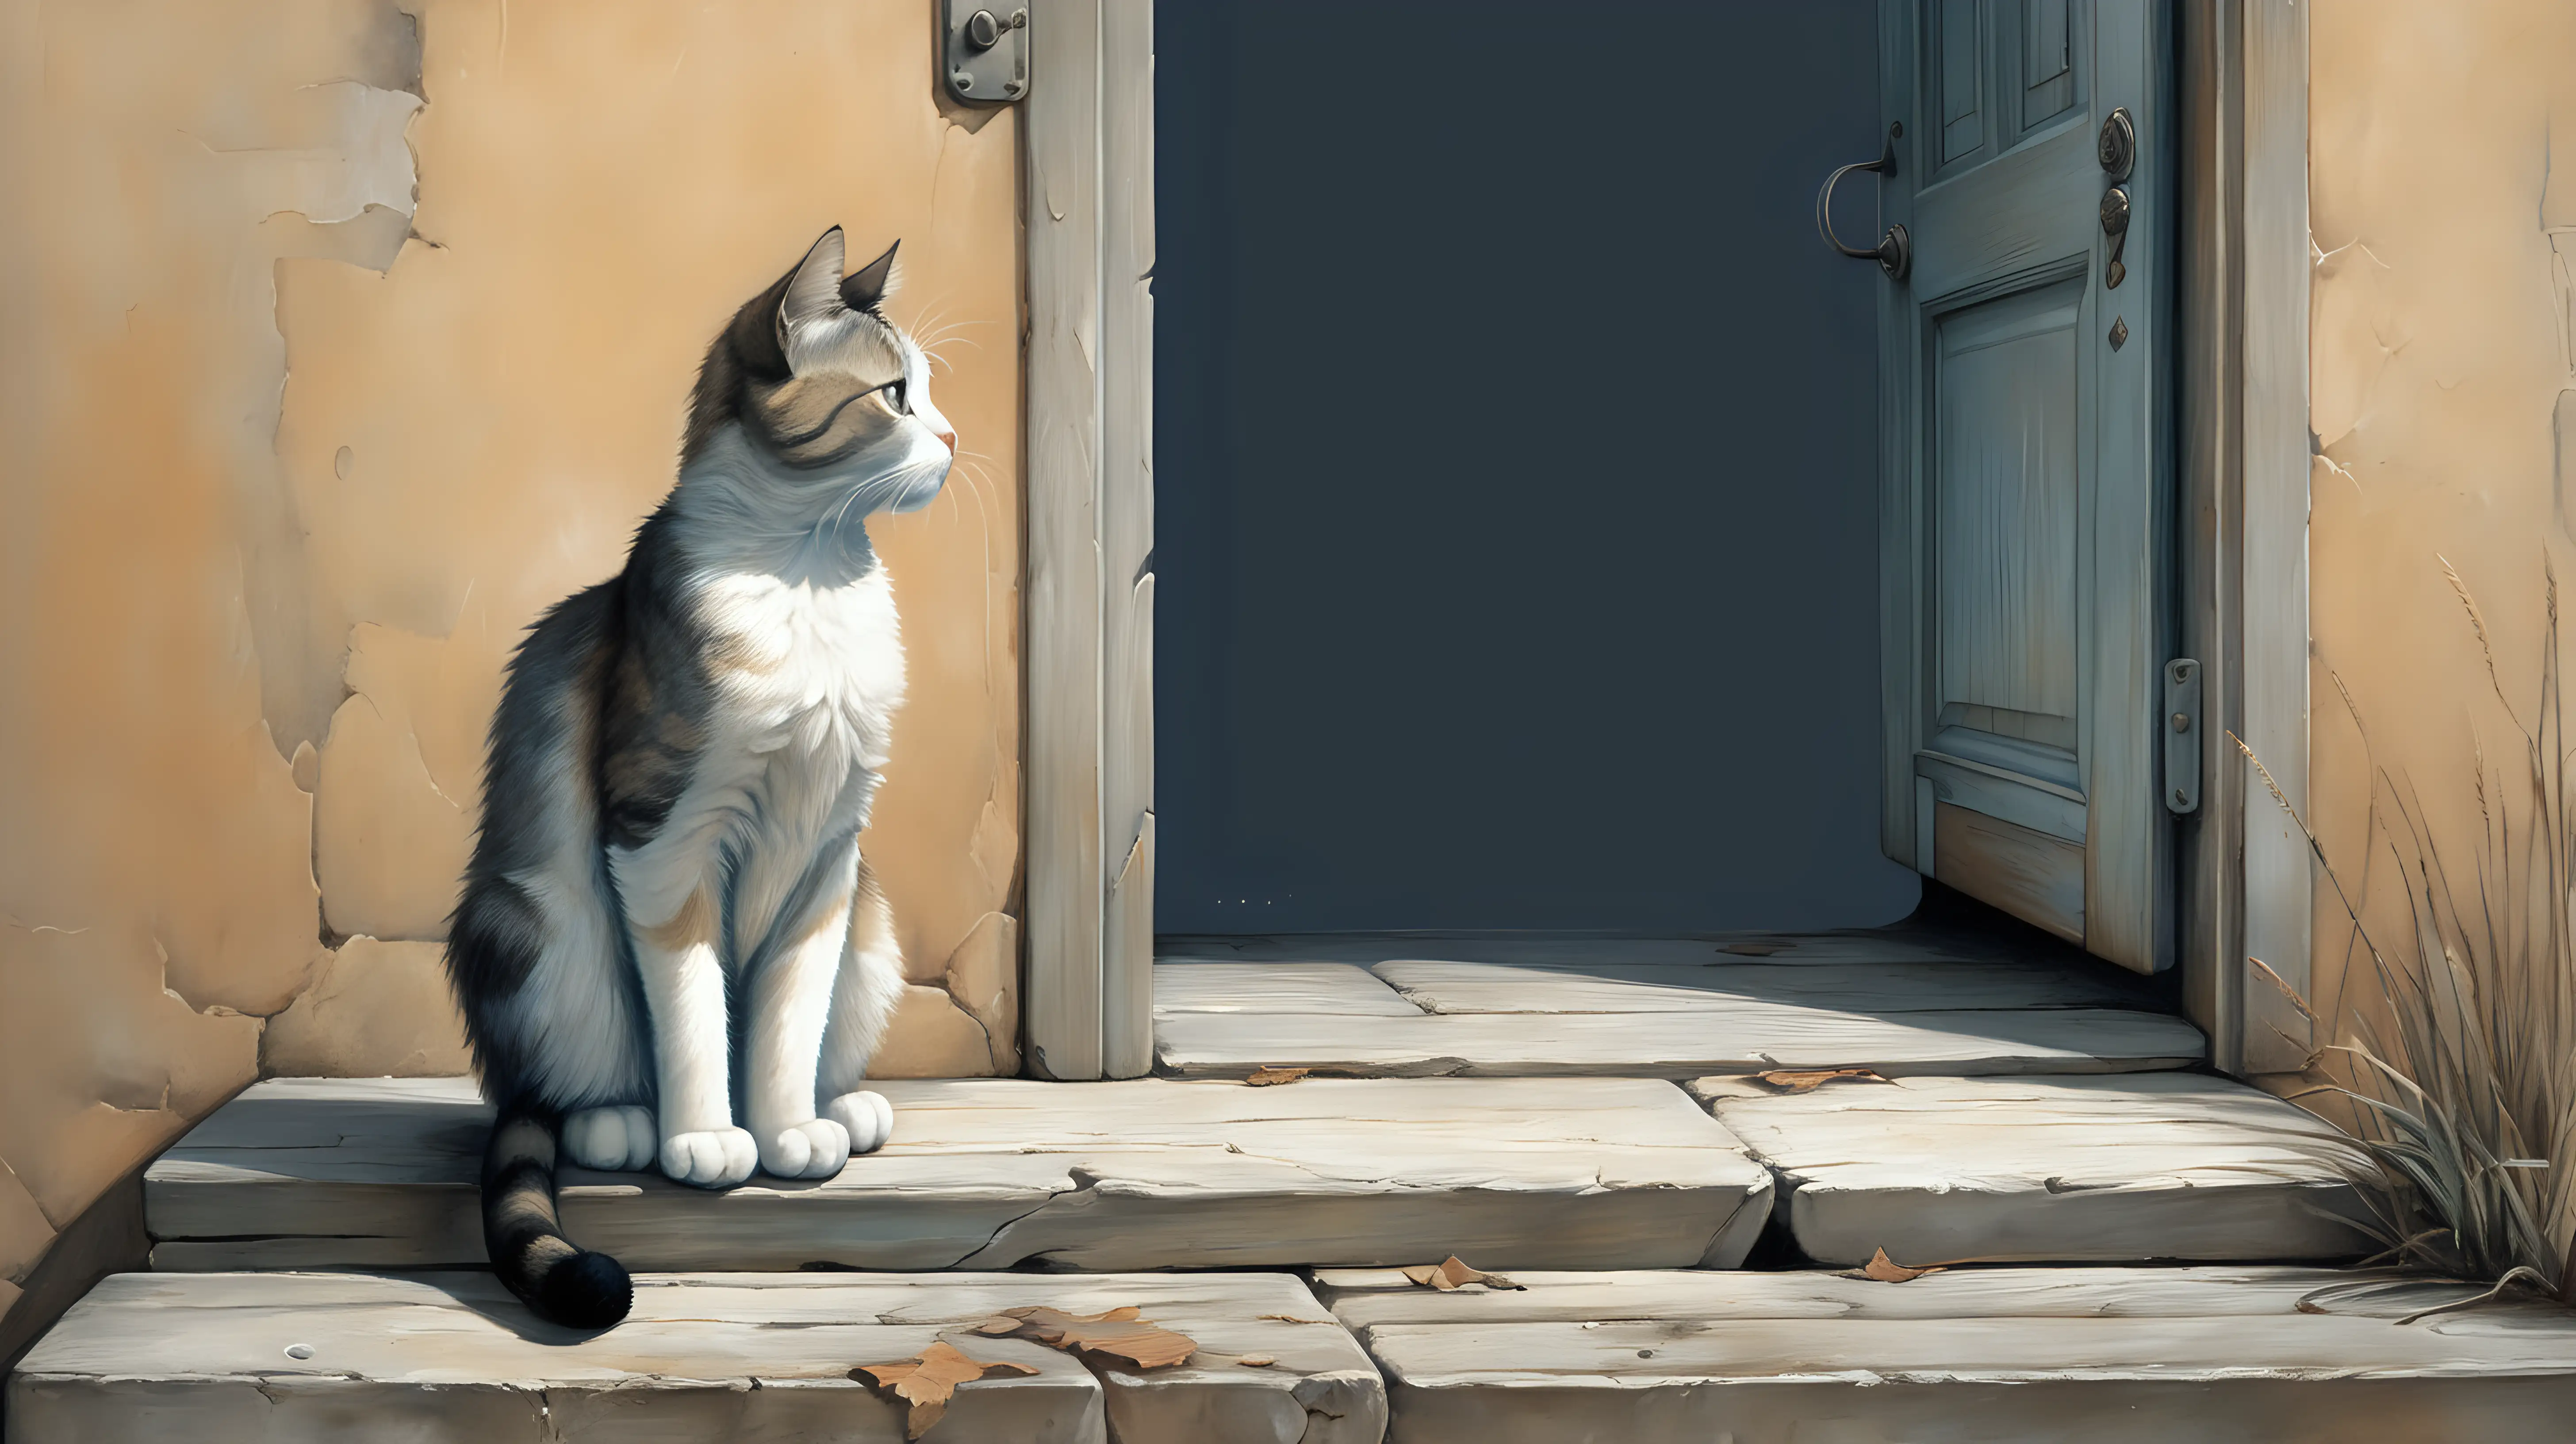 Lonely Cat Gazing into the Distance on Abandoned Doorstep